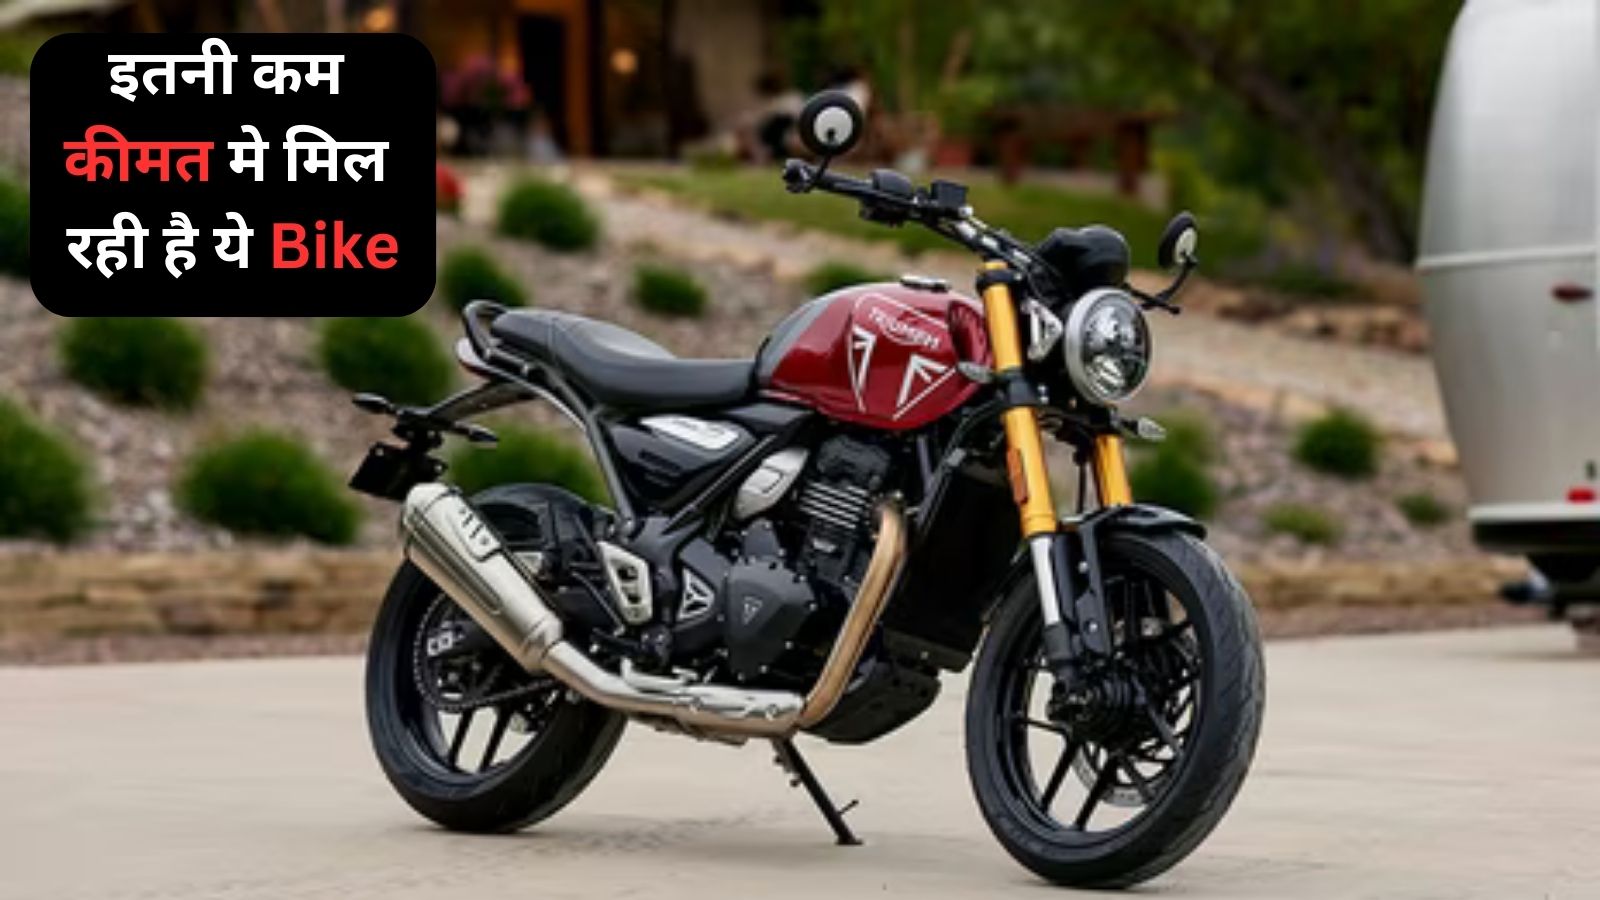 Triumph Speed 400 more than 15000 bookings in a month